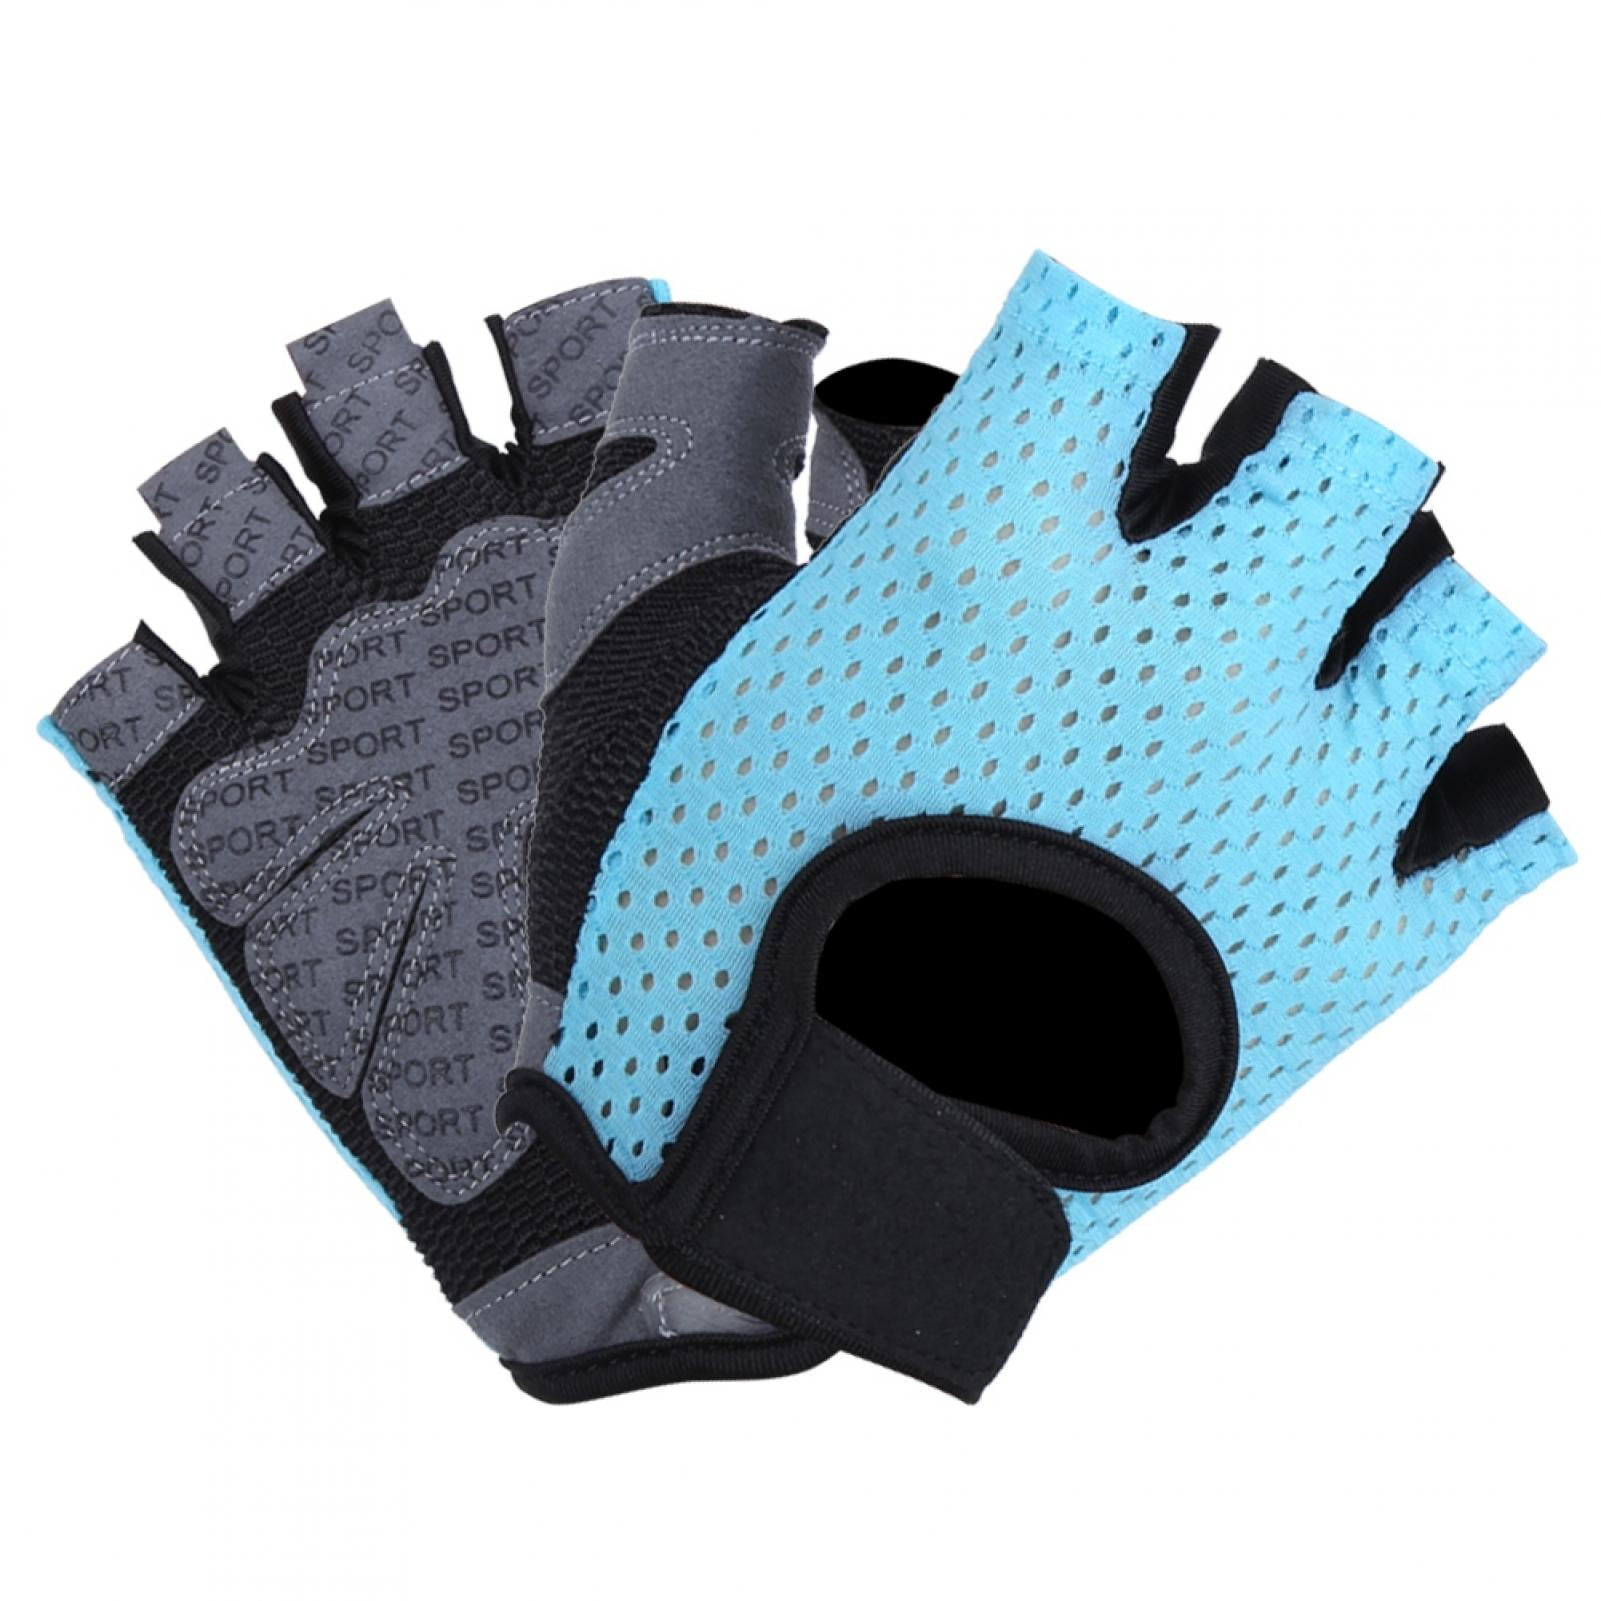 Unisex Breathable Anti-Slip Mesh Cloth Bicycle Cycling Half Finger Gloves 